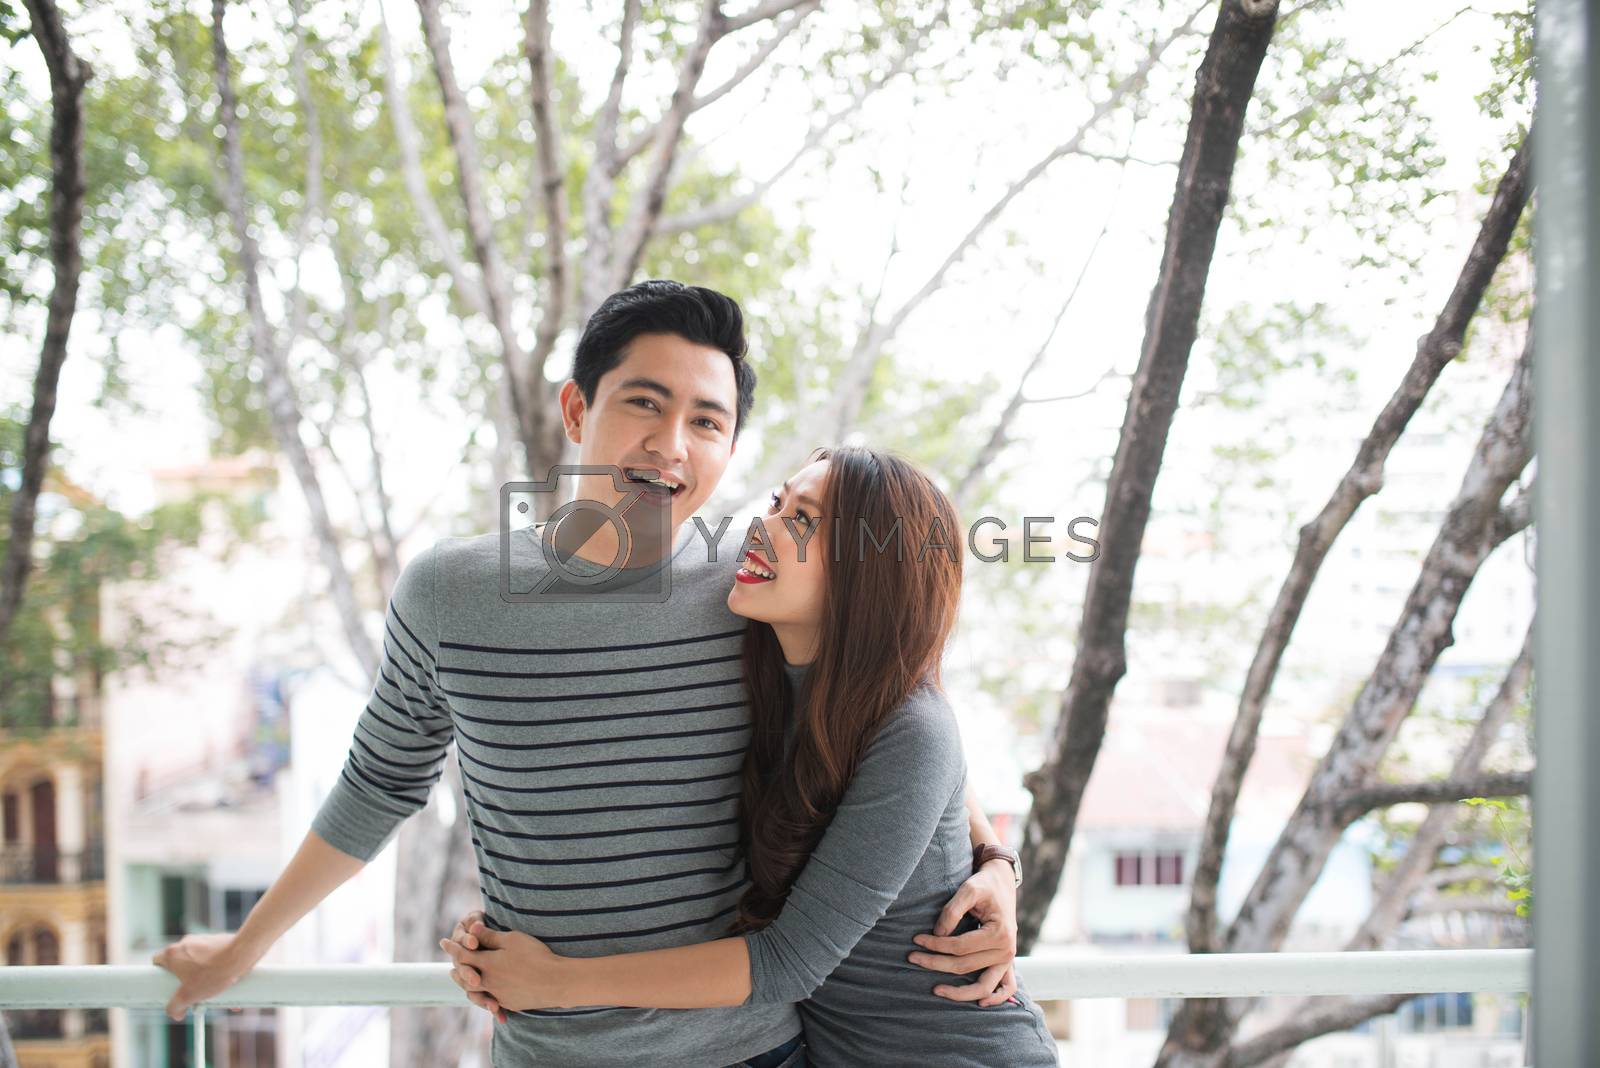 Royalty free image of Couple in love sharing genuine emotions and happiness, hugging o by makidotvn